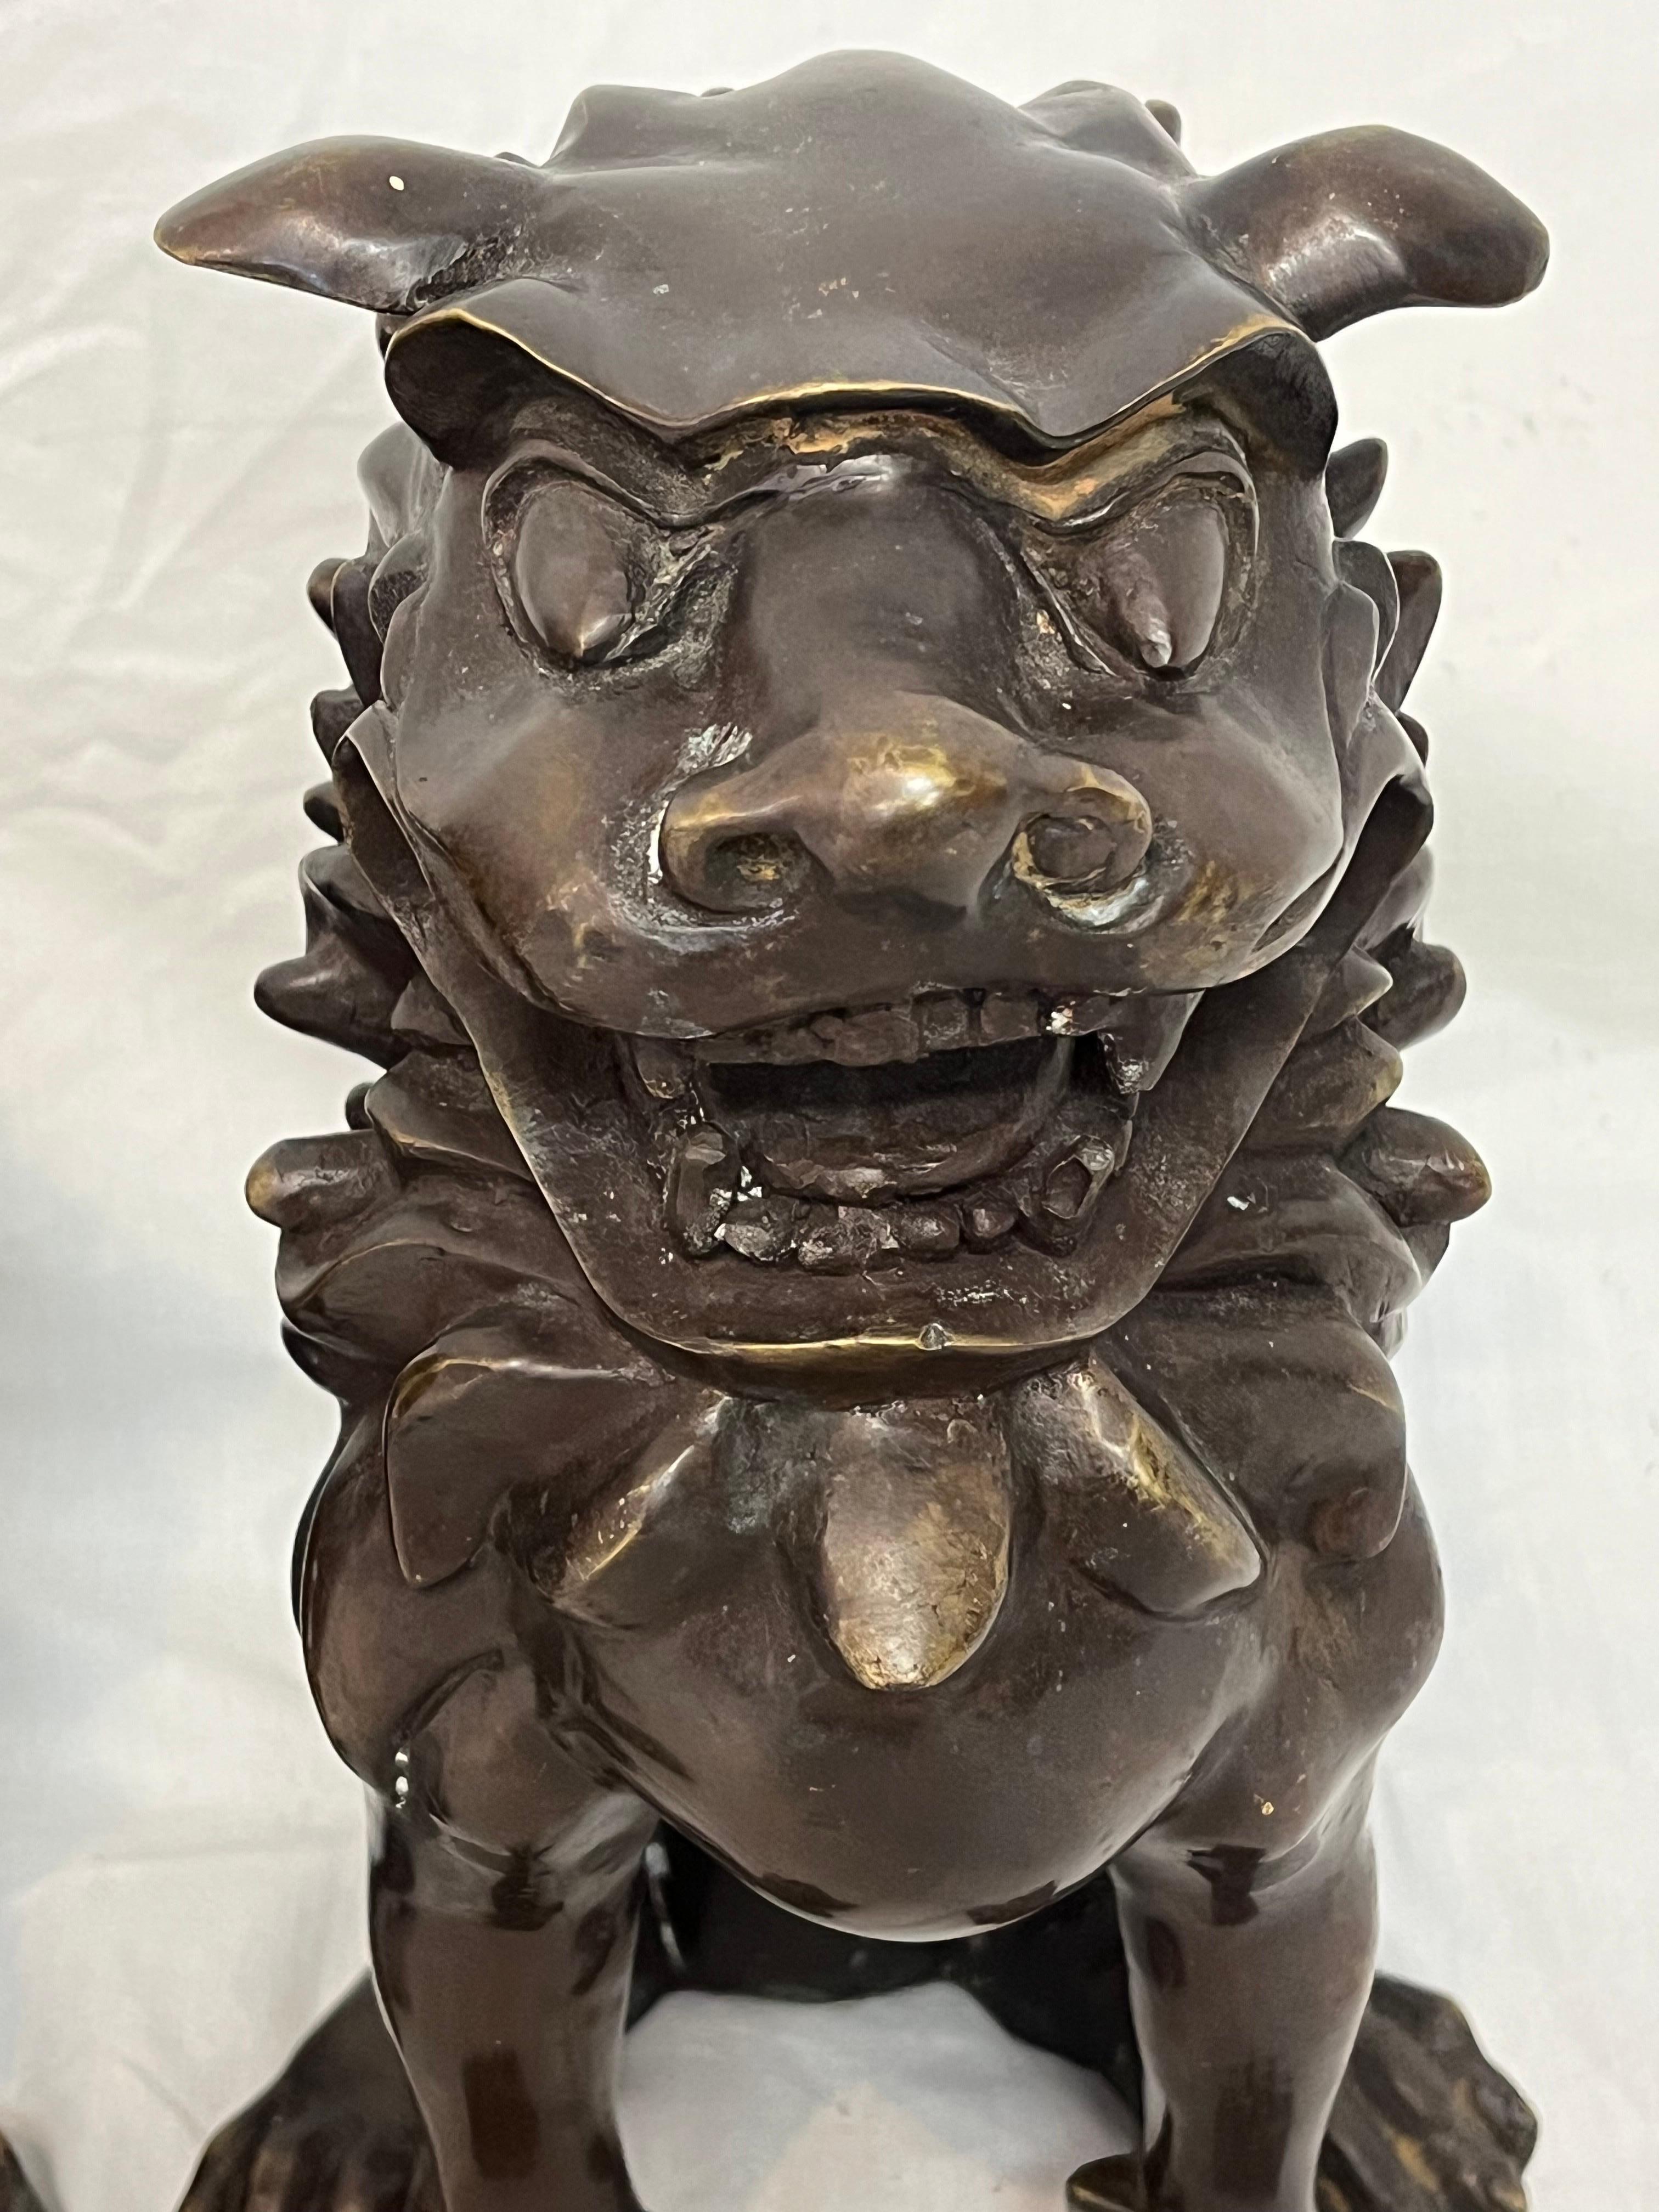 Large Pair of Bronze Lionized Shih Tzus Foo Dogs 20th Century Asian Sculptures For Sale 8